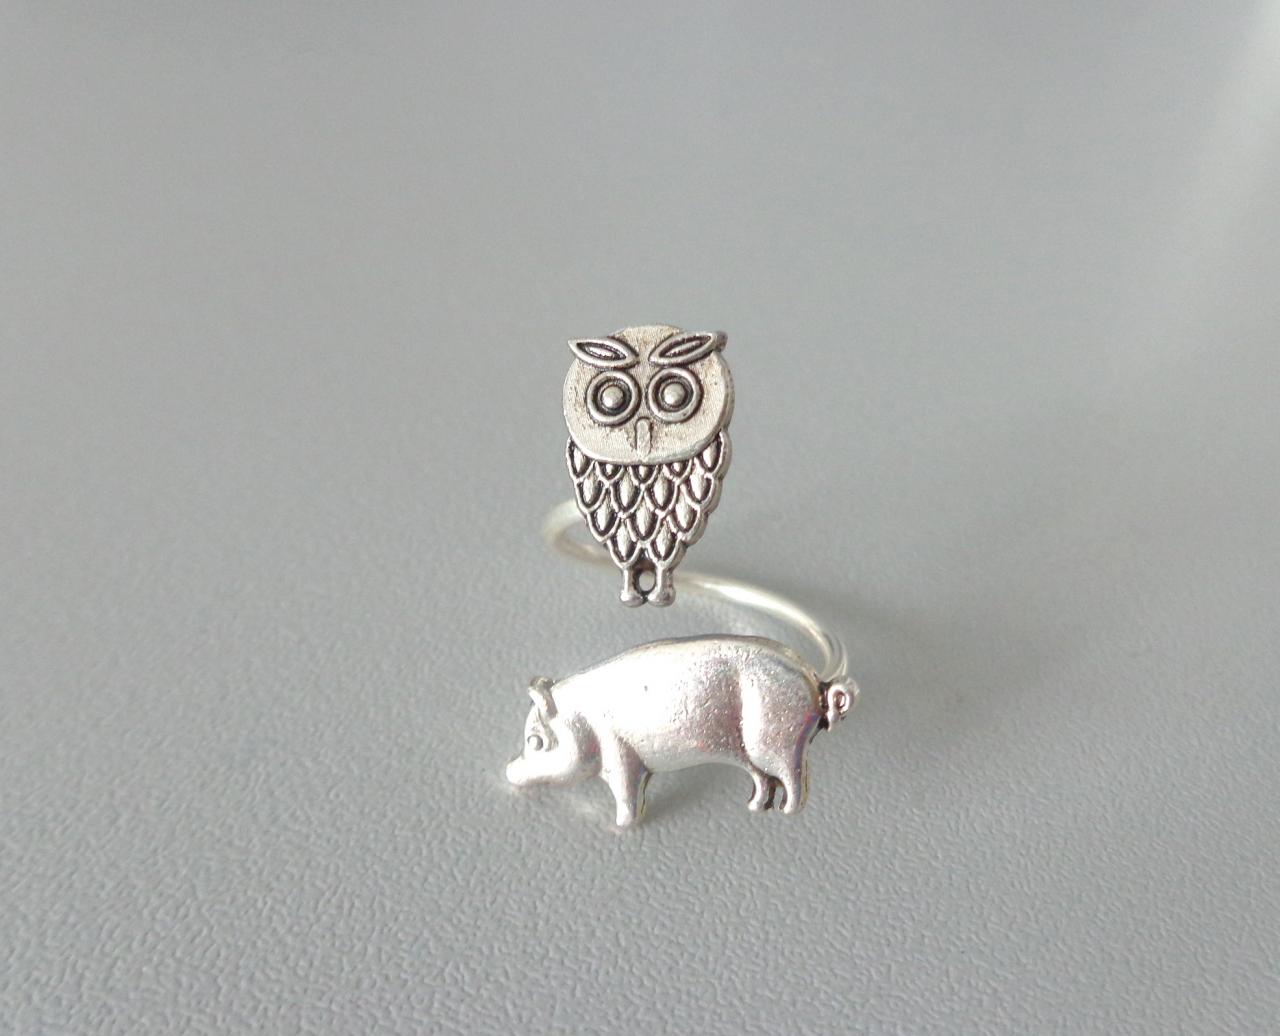 Owl And Pig Ring, Adjustable Ring